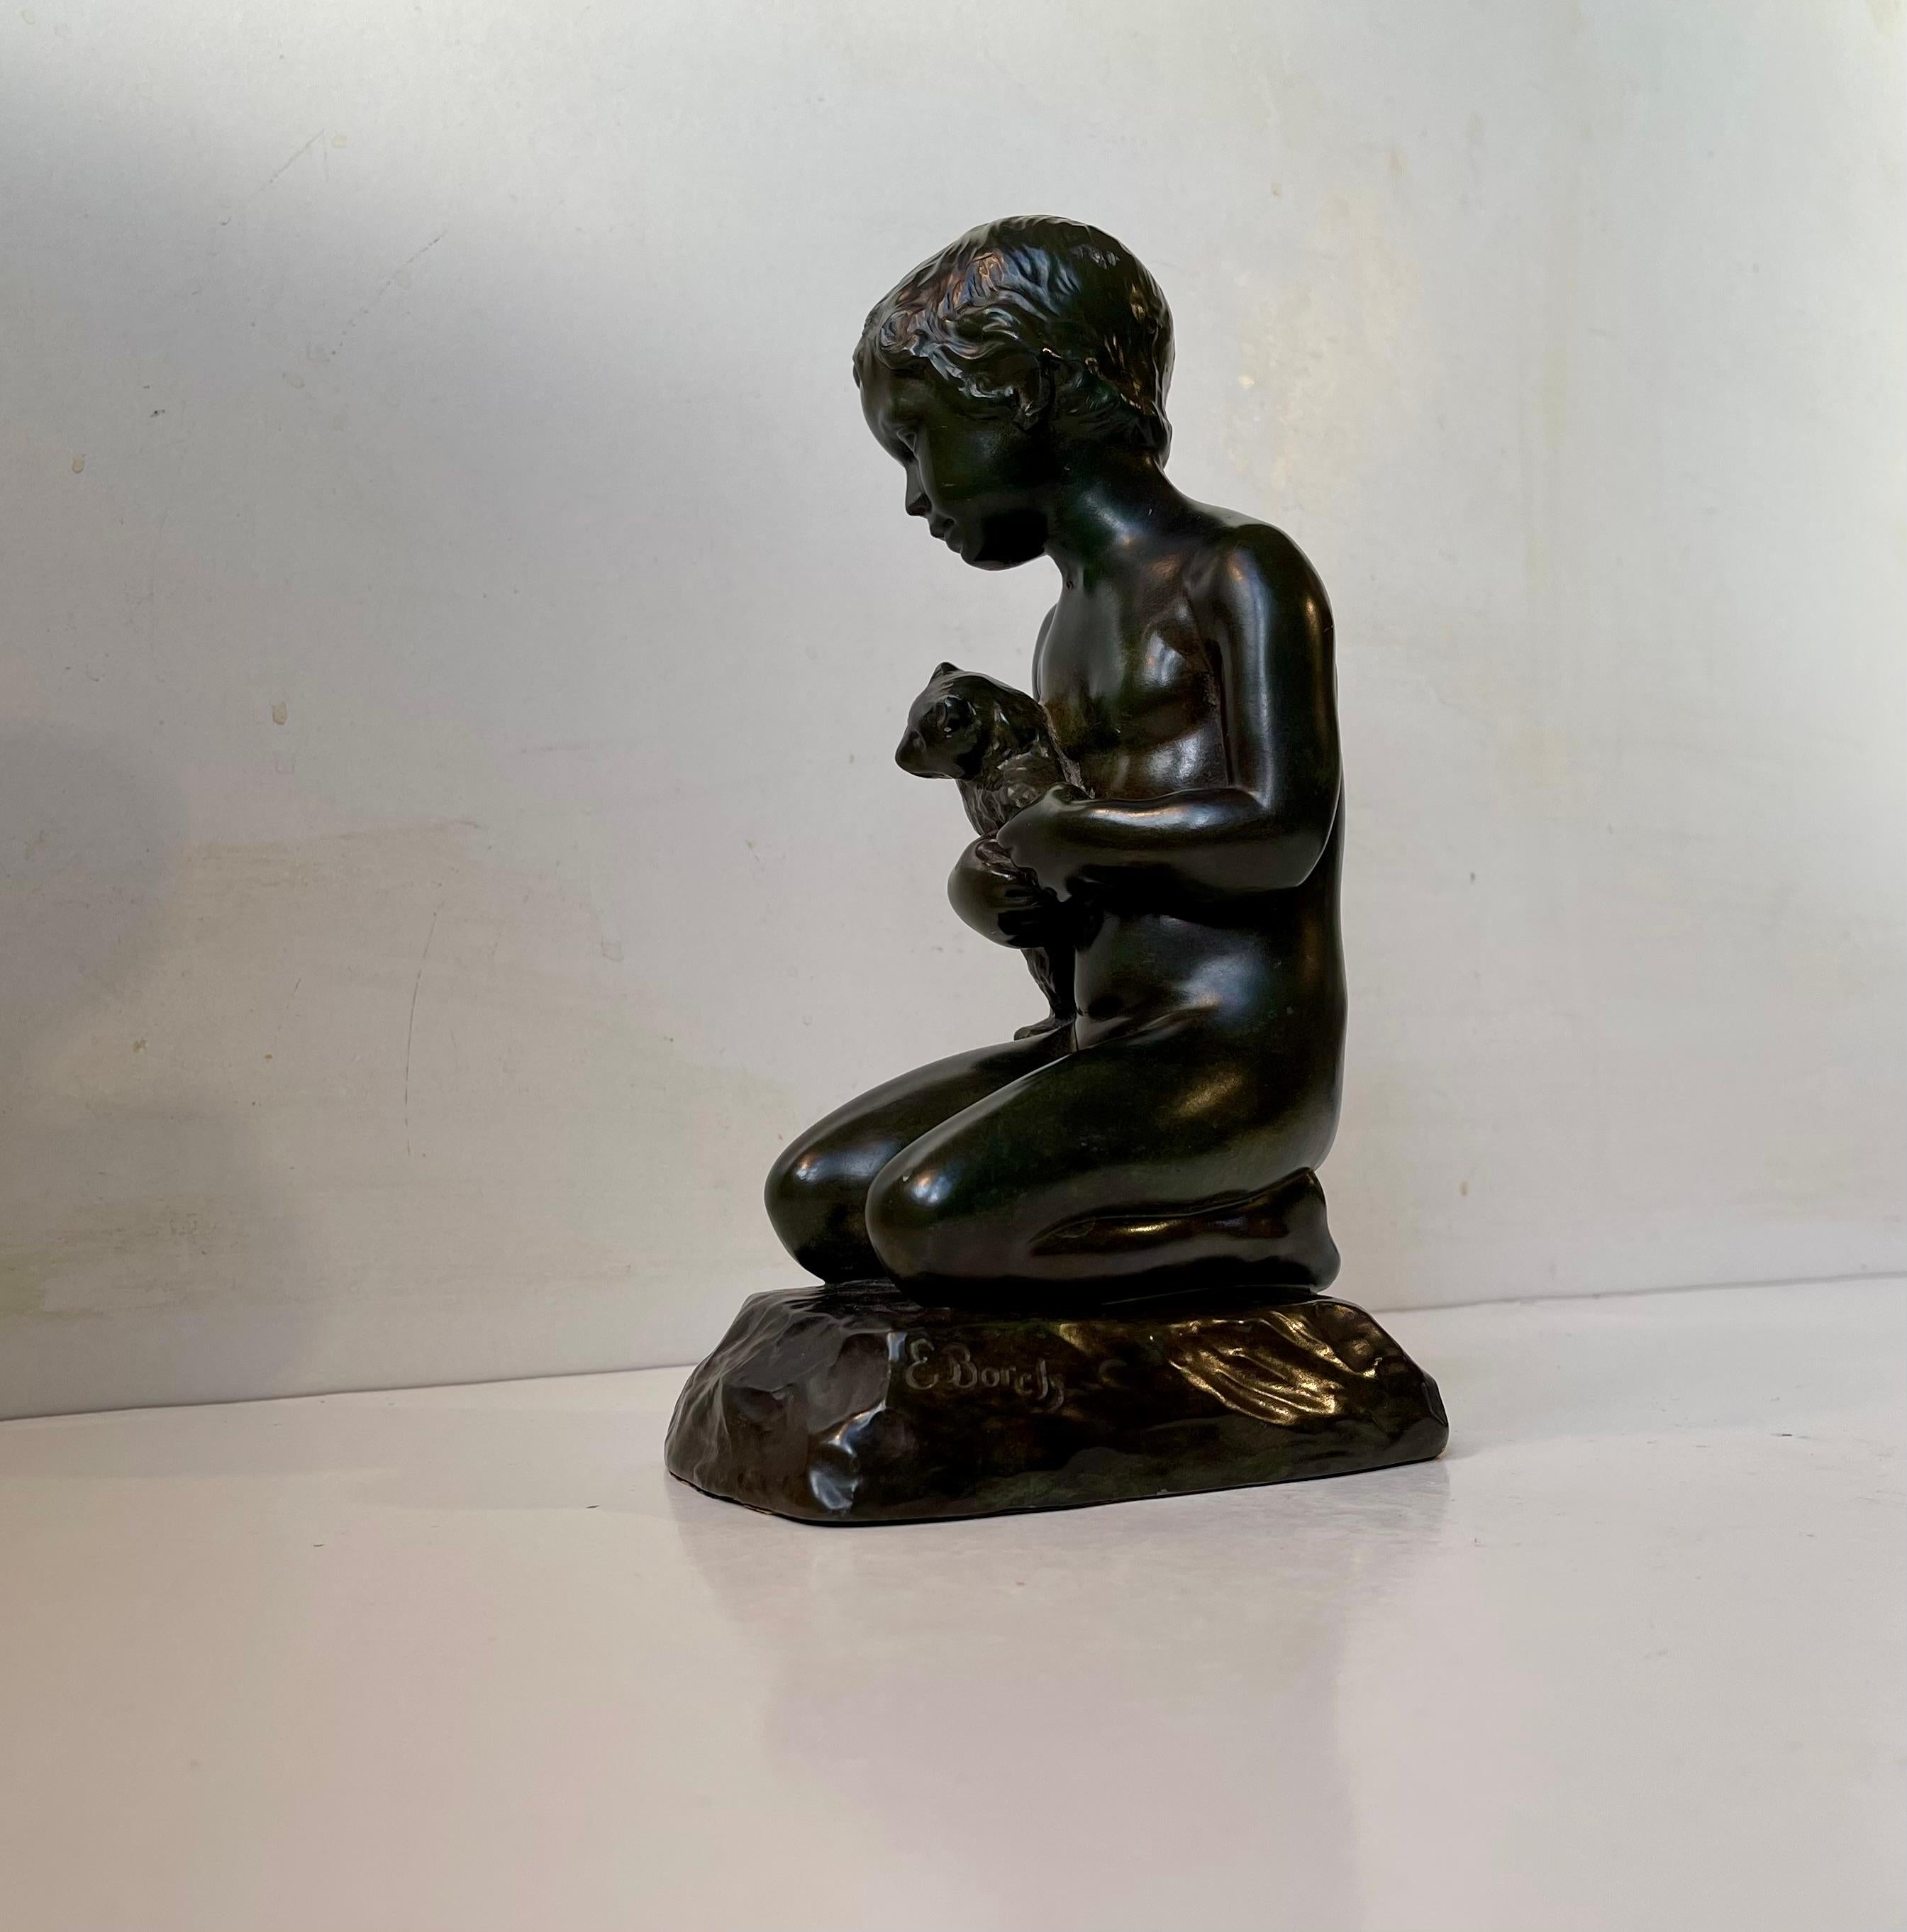 Just Andersen & E. Borch Art Deco Sculpture of Boy with Teddybear, 1940s In Good Condition For Sale In Esbjerg, DK